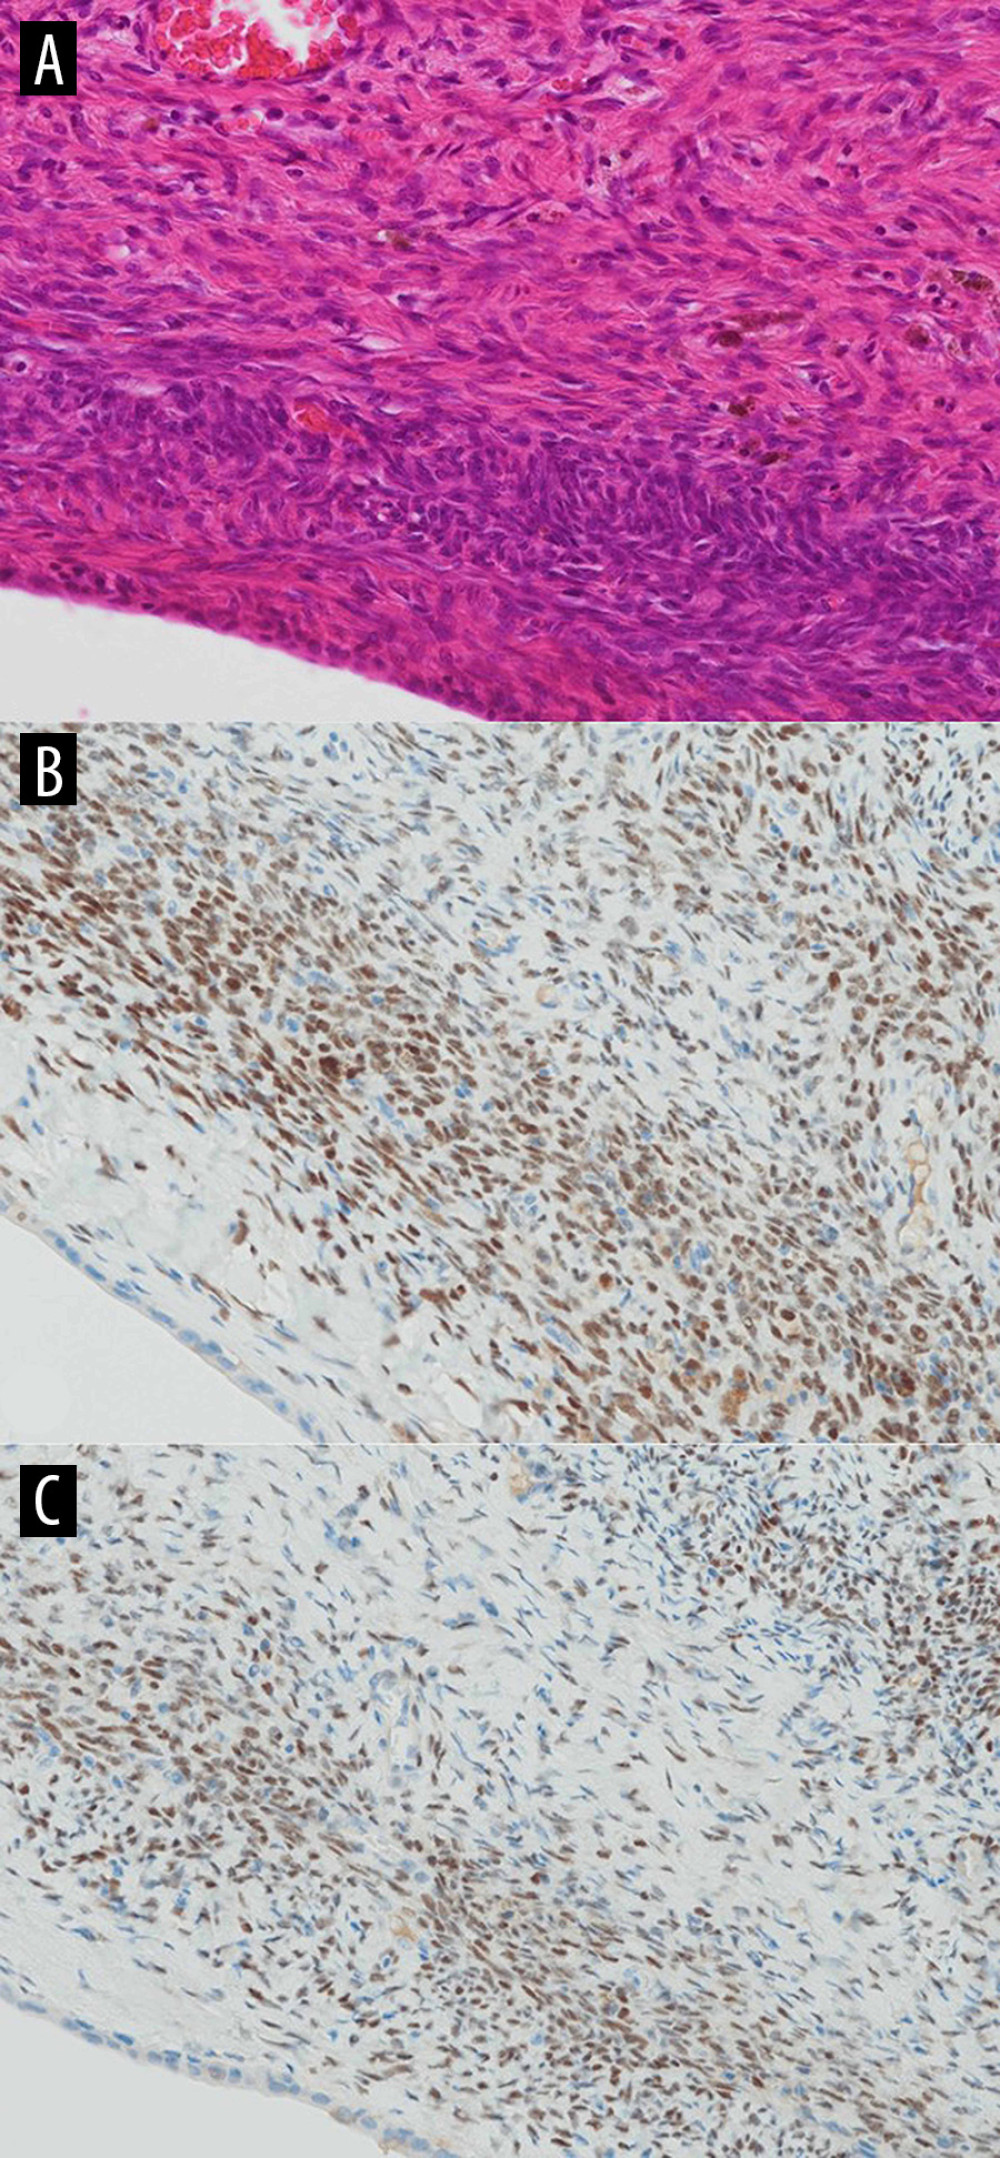 Ovarian-like stroma. Ovarian-like stroma was observed (hematoxylin-eosin staining, ×80 magnification) (A). Ovarian-like stroma was positive for estrogen receptor (B) and progesterone receptor (C) in immunohistochemical studies.